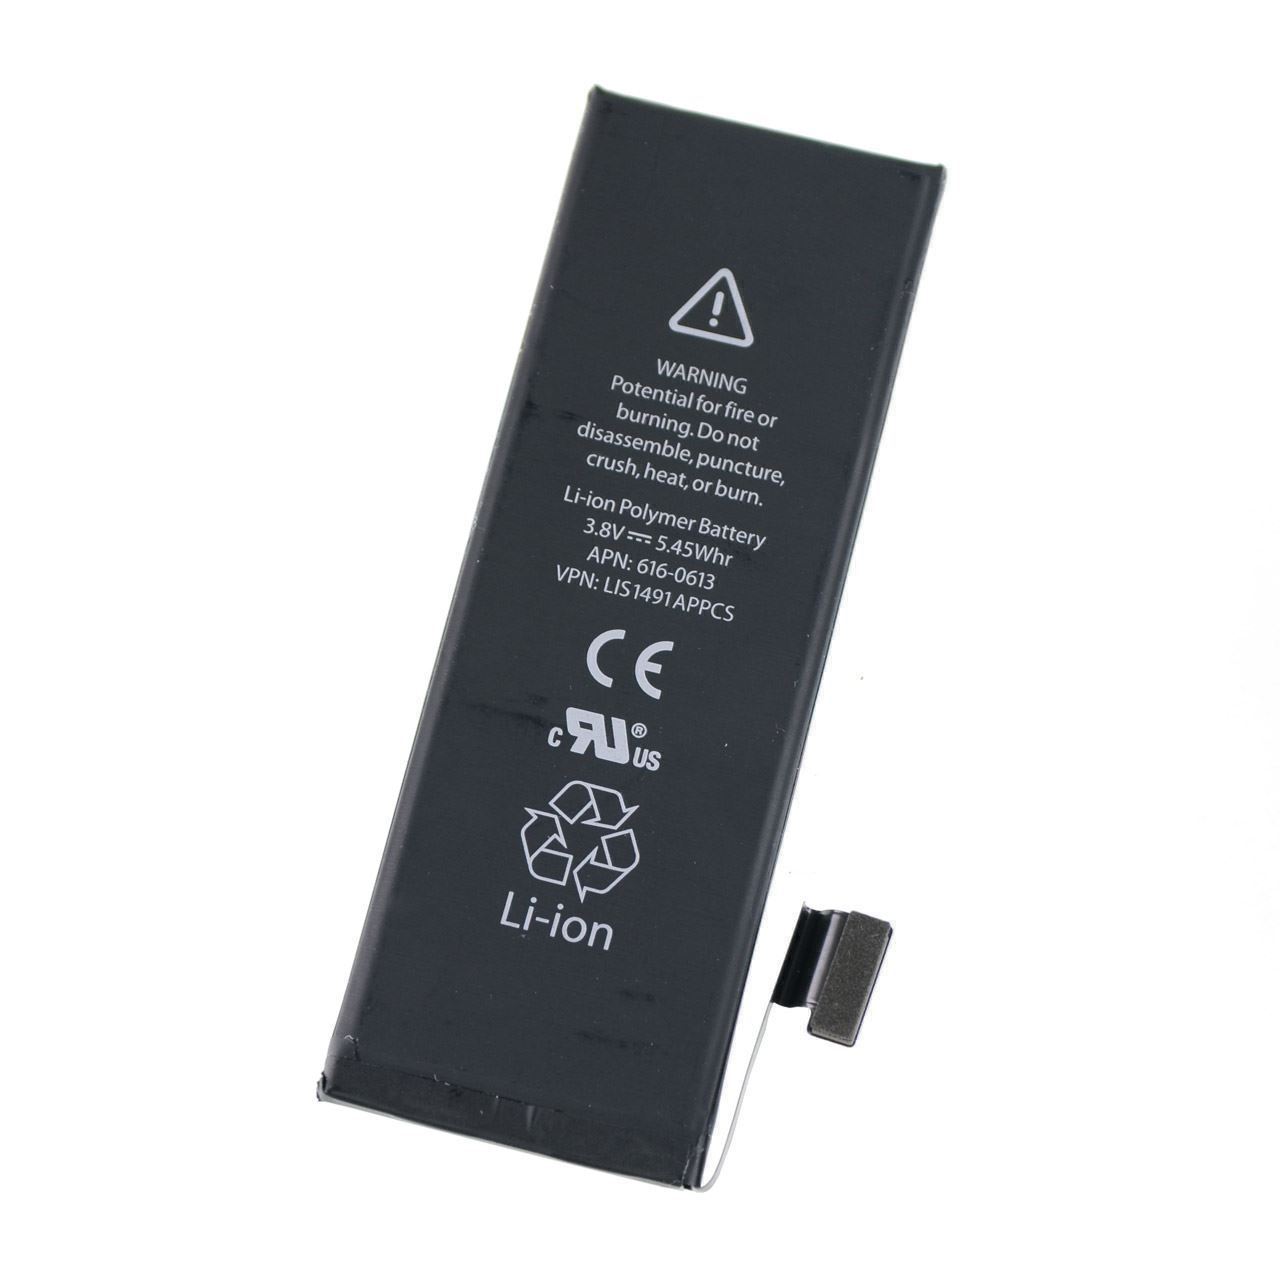 iPhone 7 Plus Replacement Battery